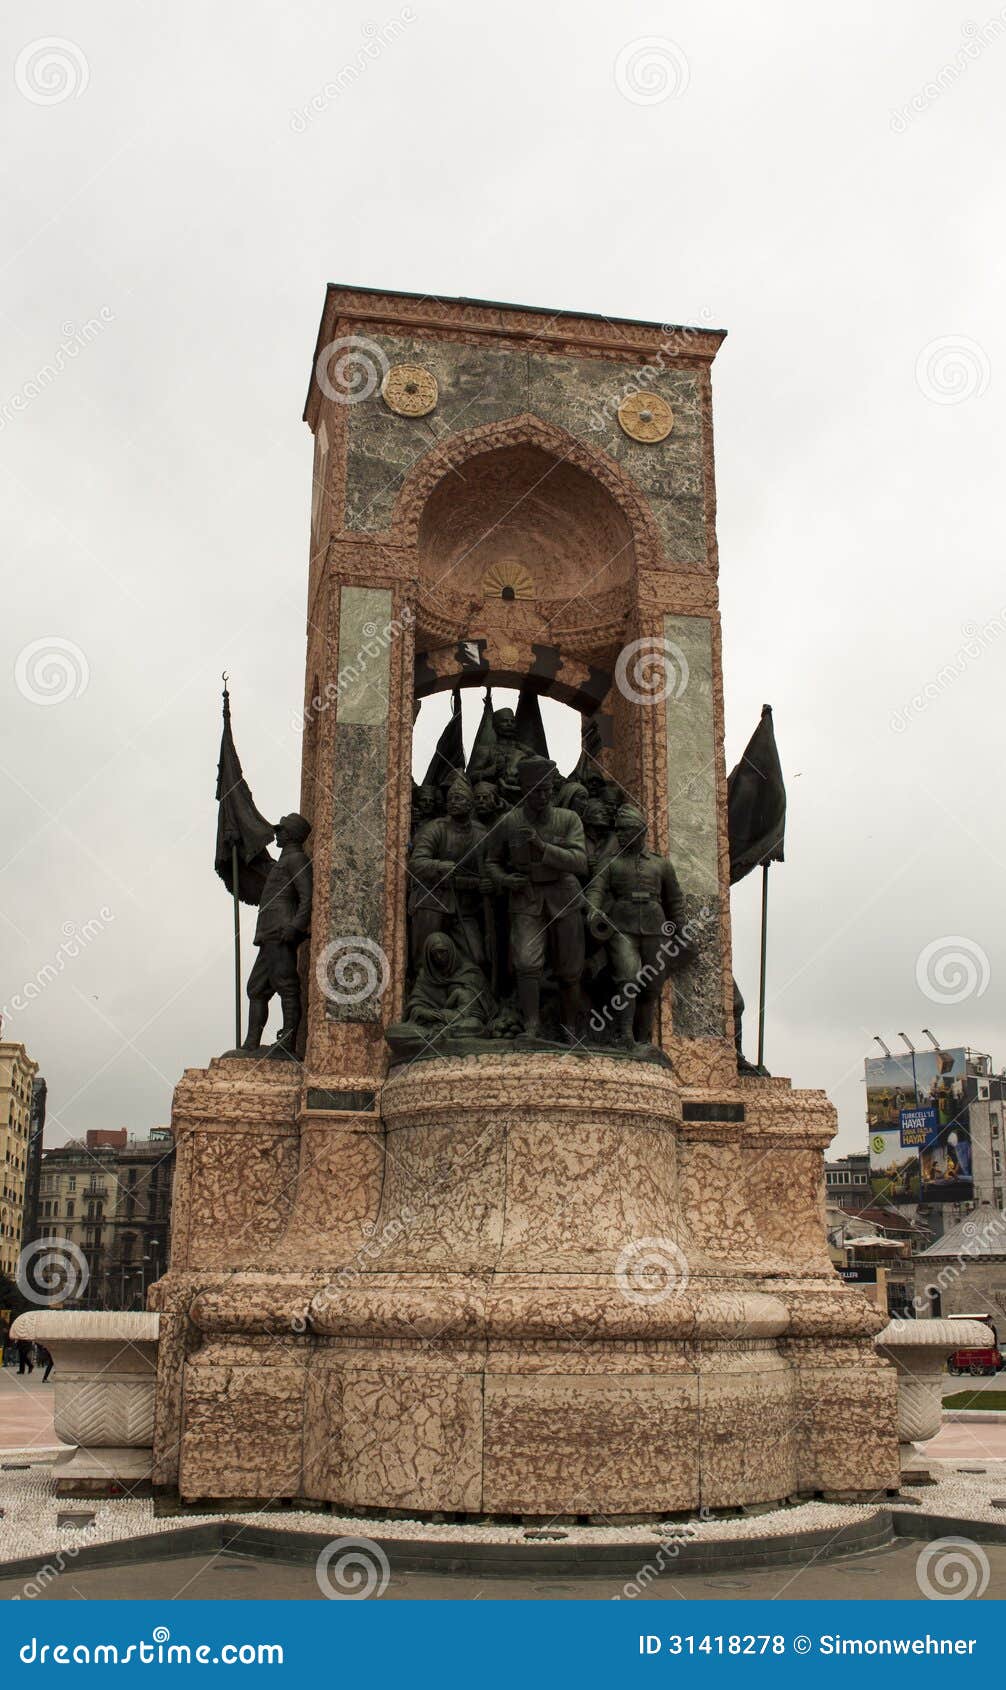 istanbul, turkey - the monument of the republic on taksim square